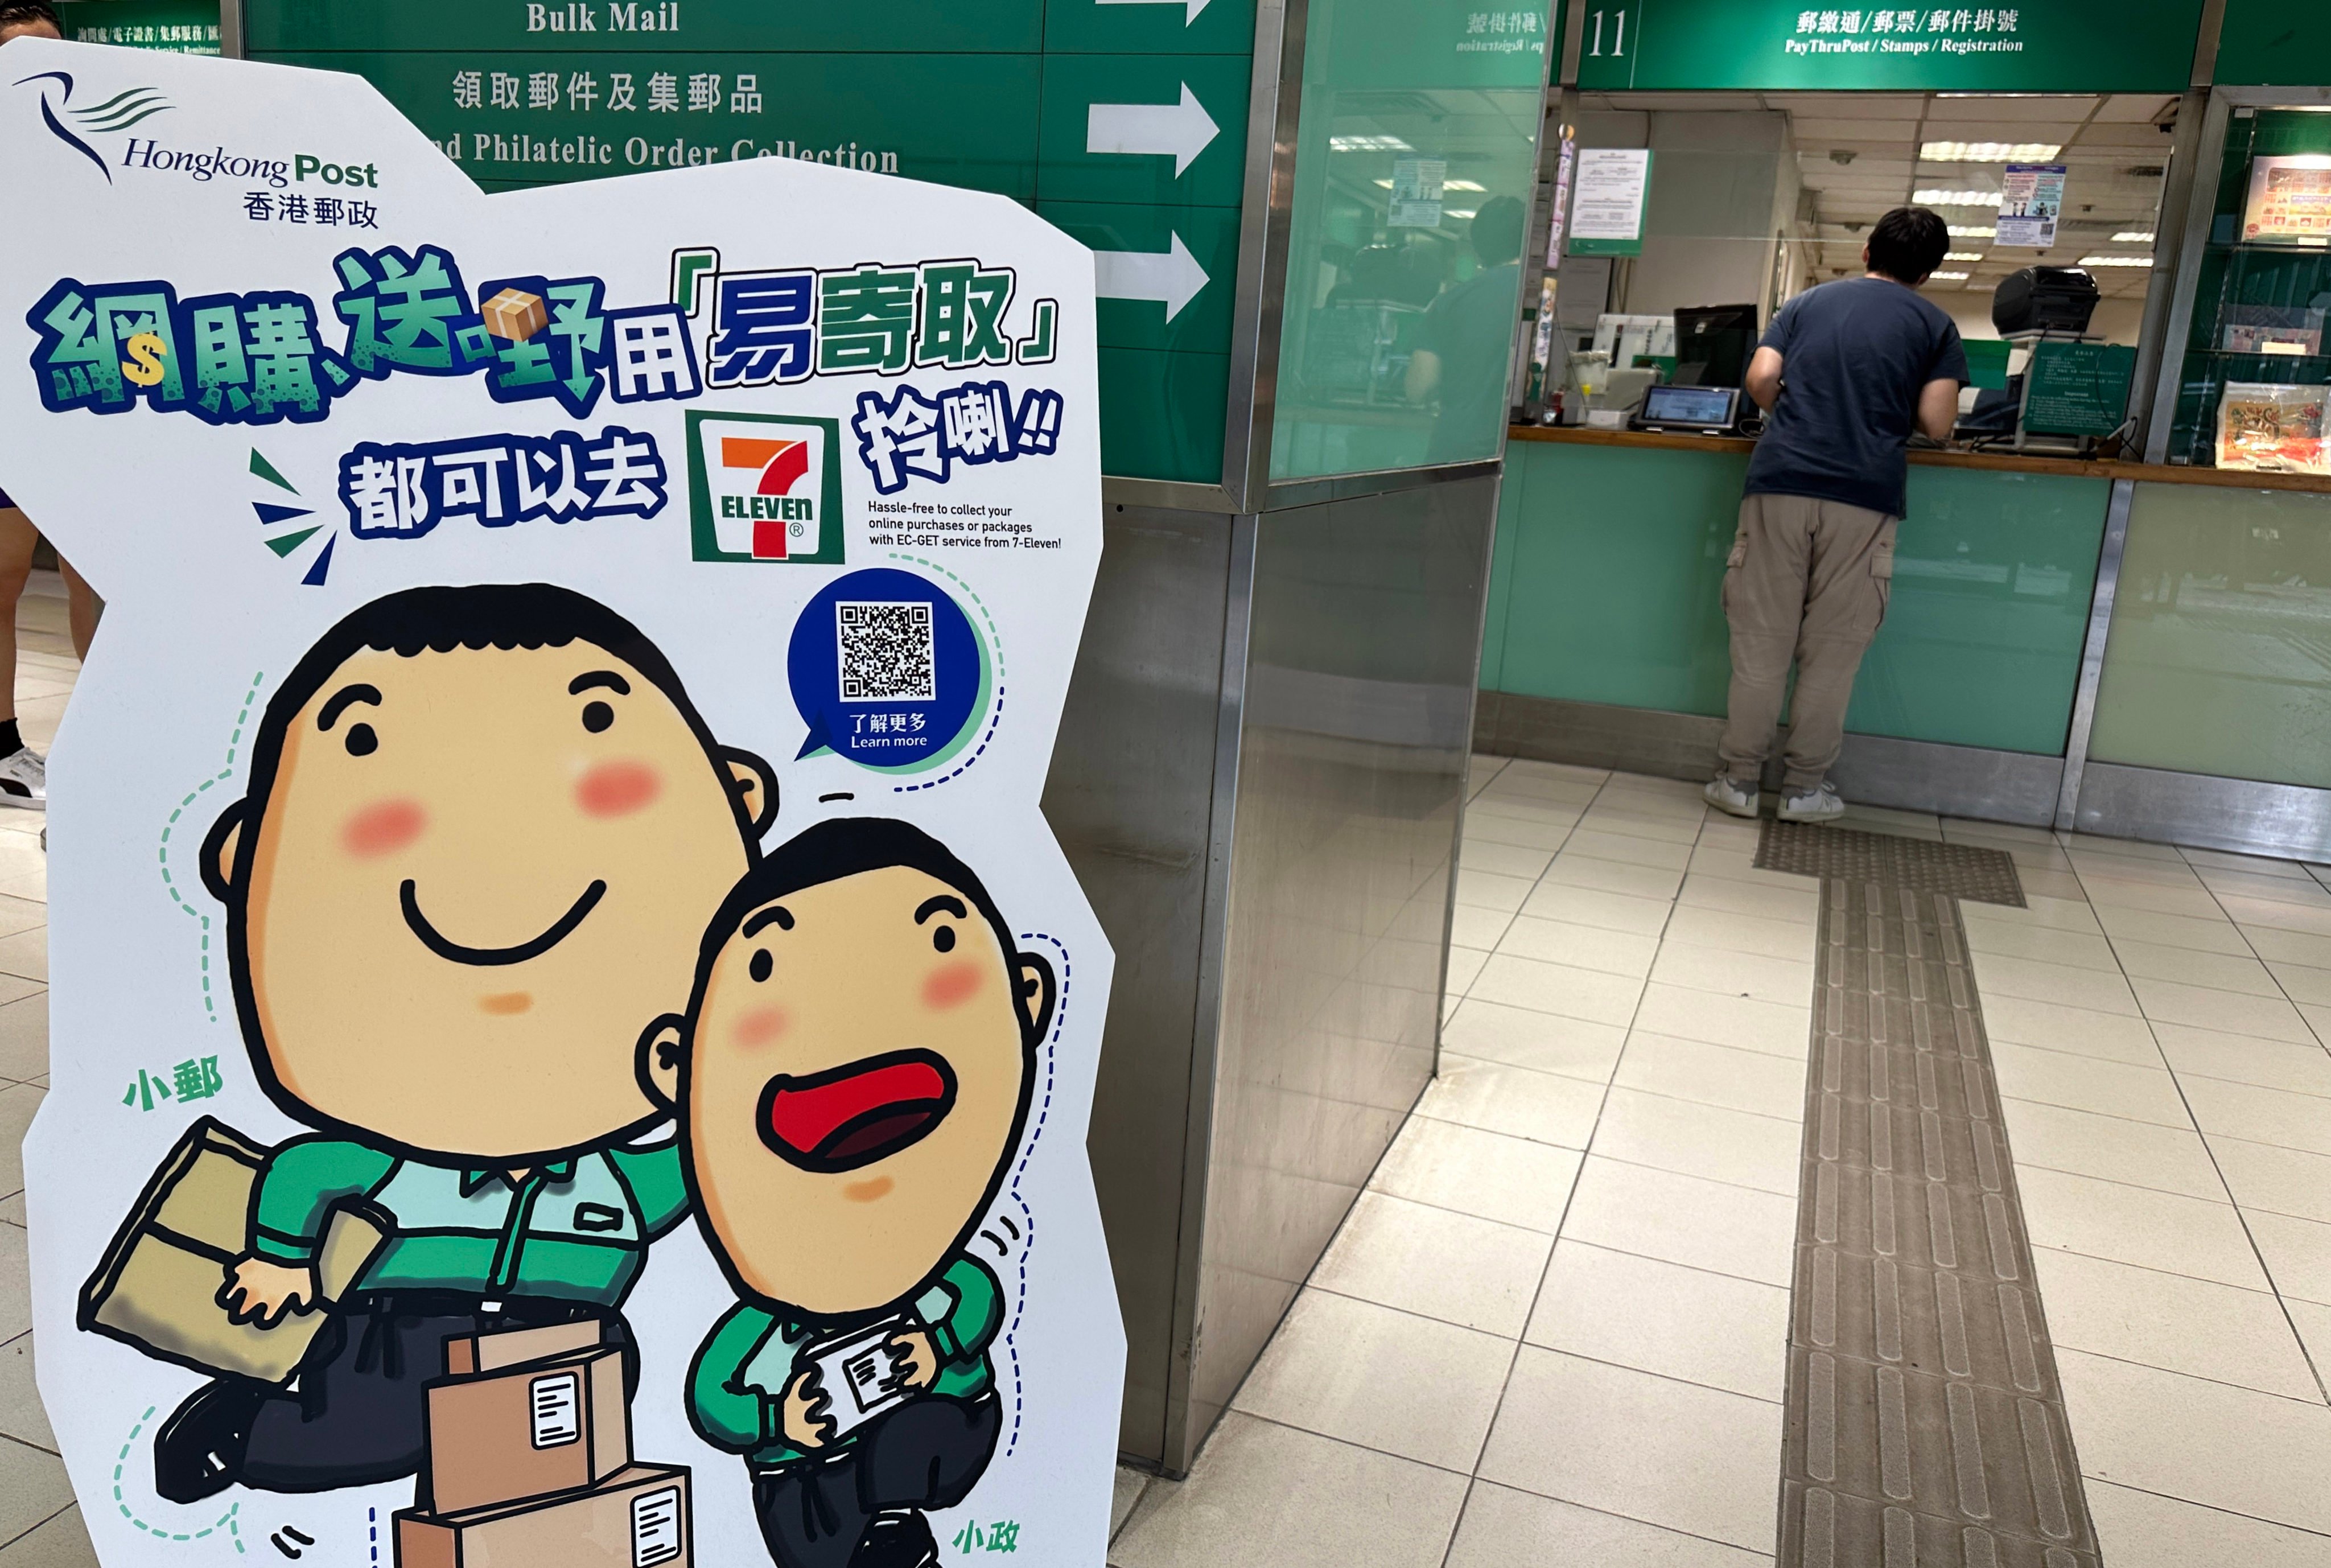 A view of Tsim Sha Tsui Post Office on April 24. Like postal services around the world, Hongkong Post continues to grapple with falling demand for traditional mail. Photo: Jelly Tse 